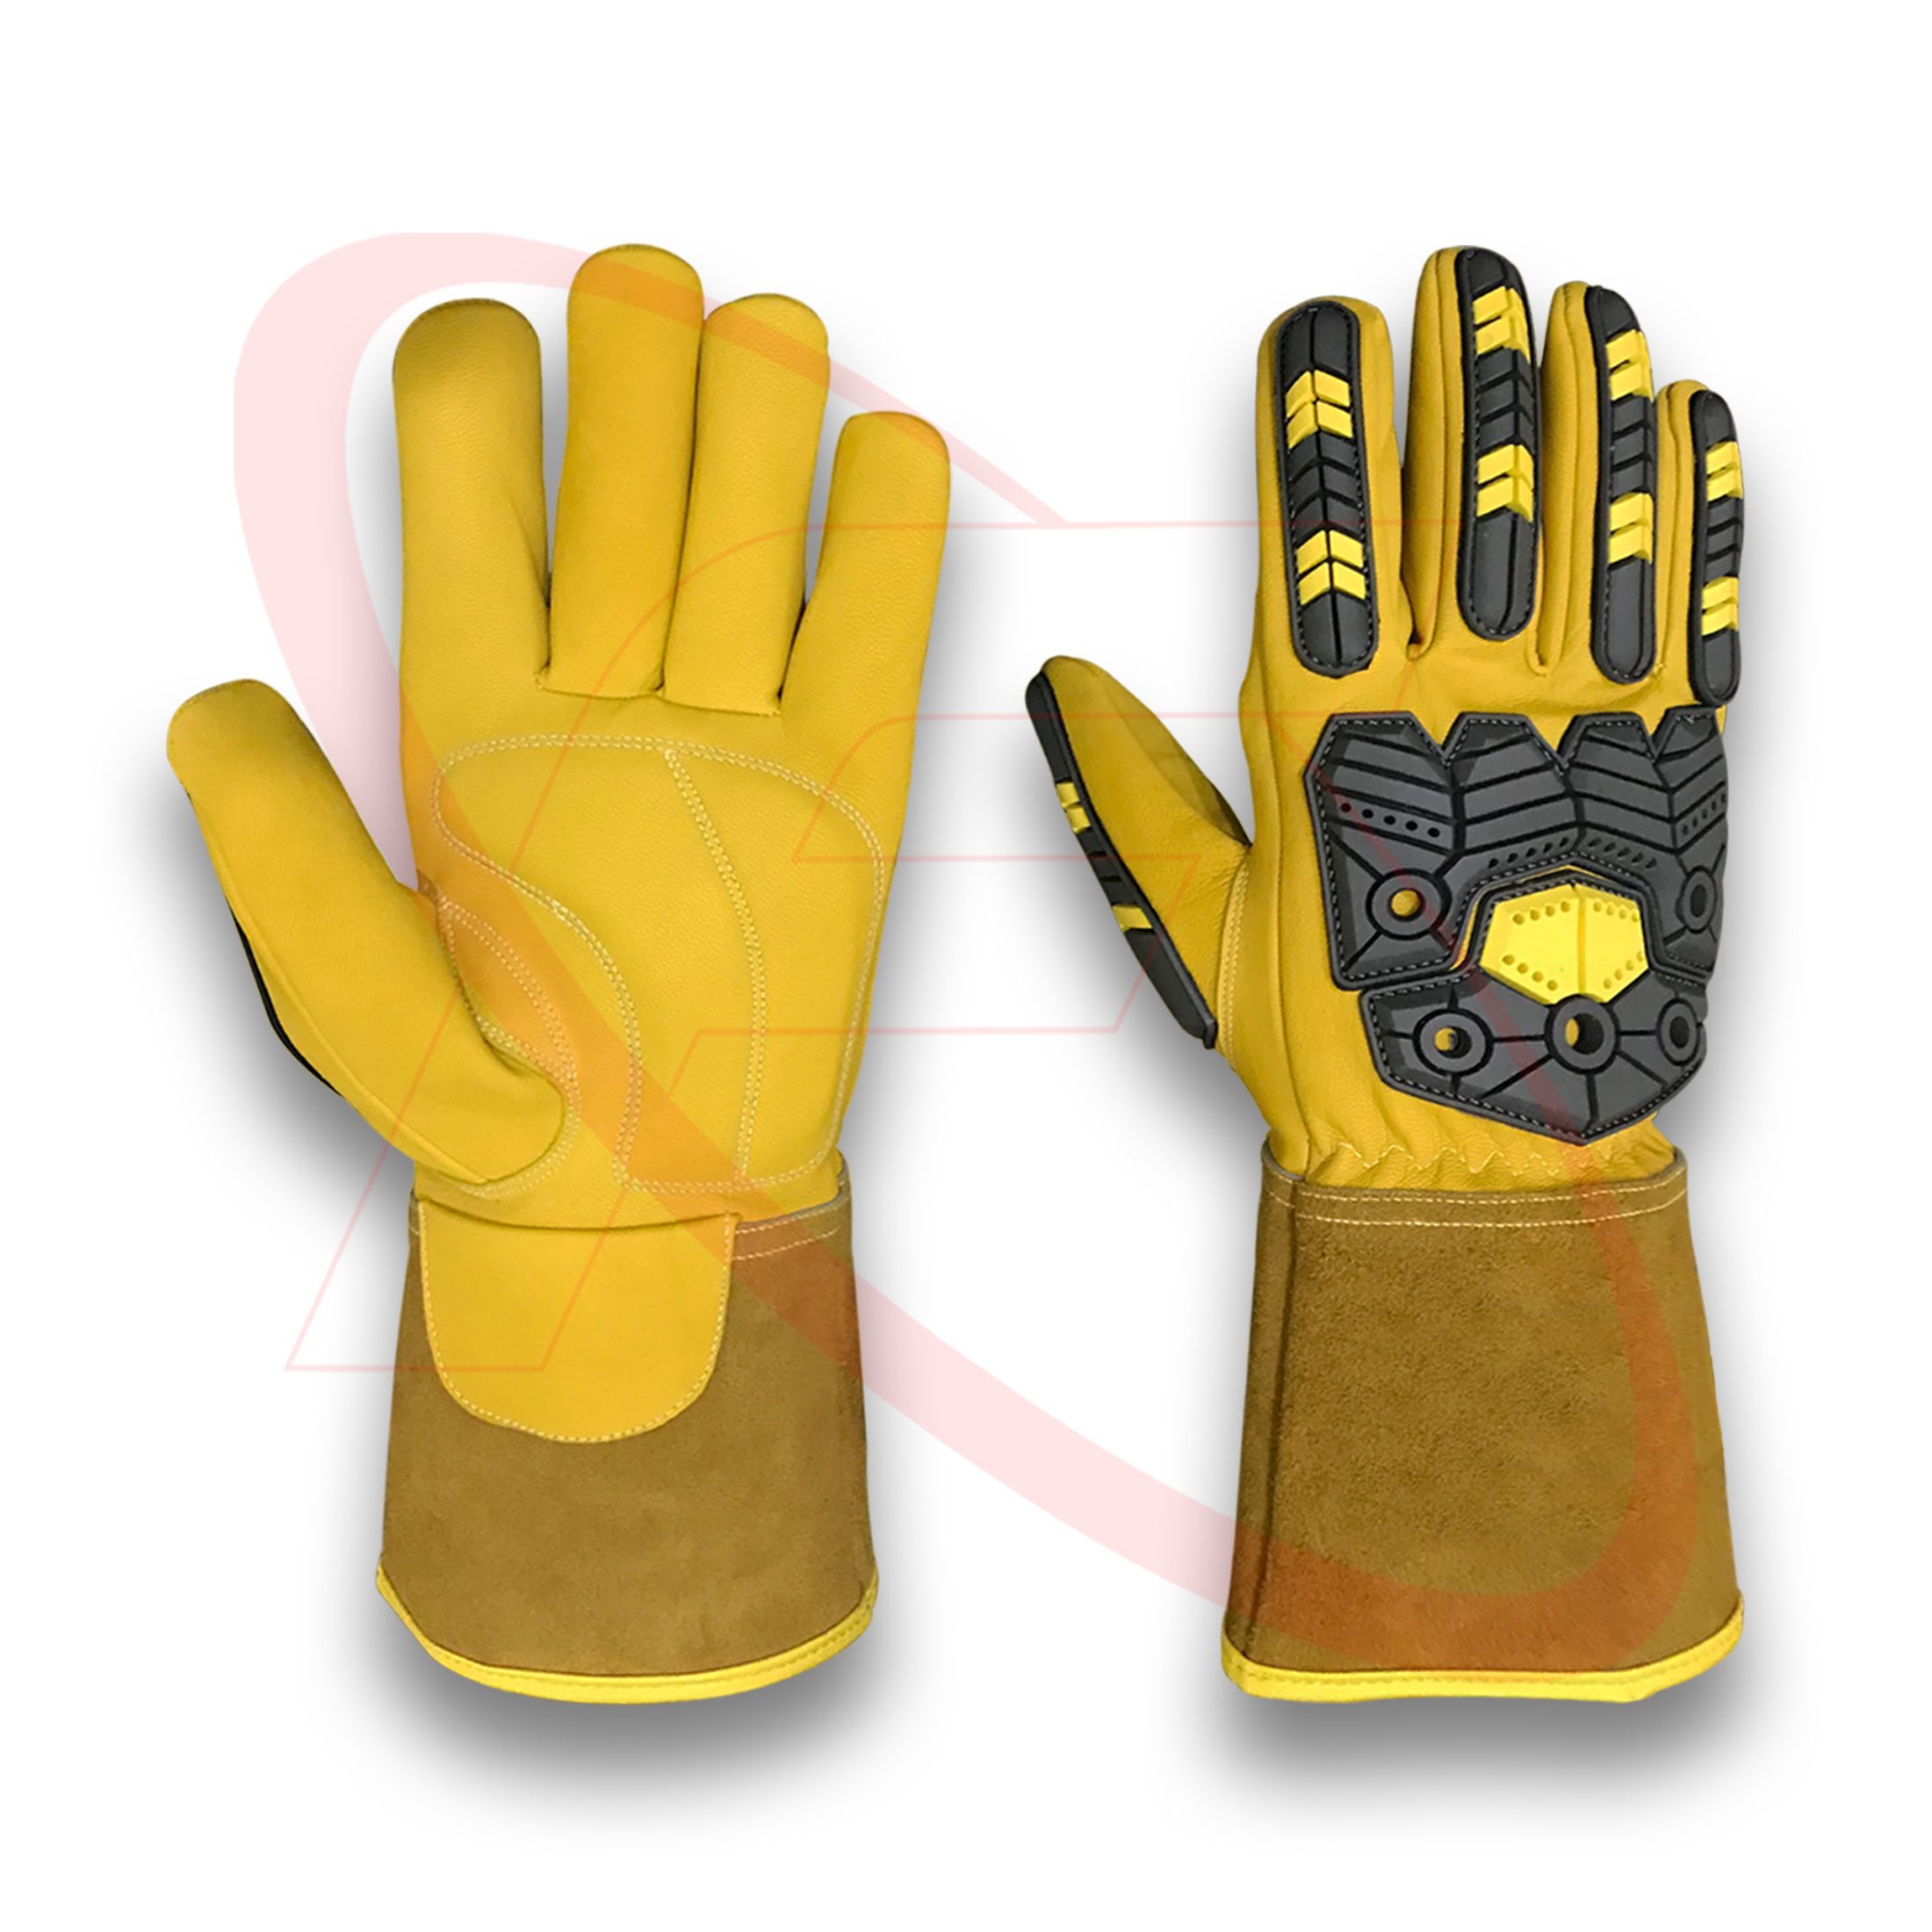 Impact Gloves in Goatskin Leather Tig Welding Gloves For Safety Work Wholesale Impact TPR Cut Resistant Driver Gloves